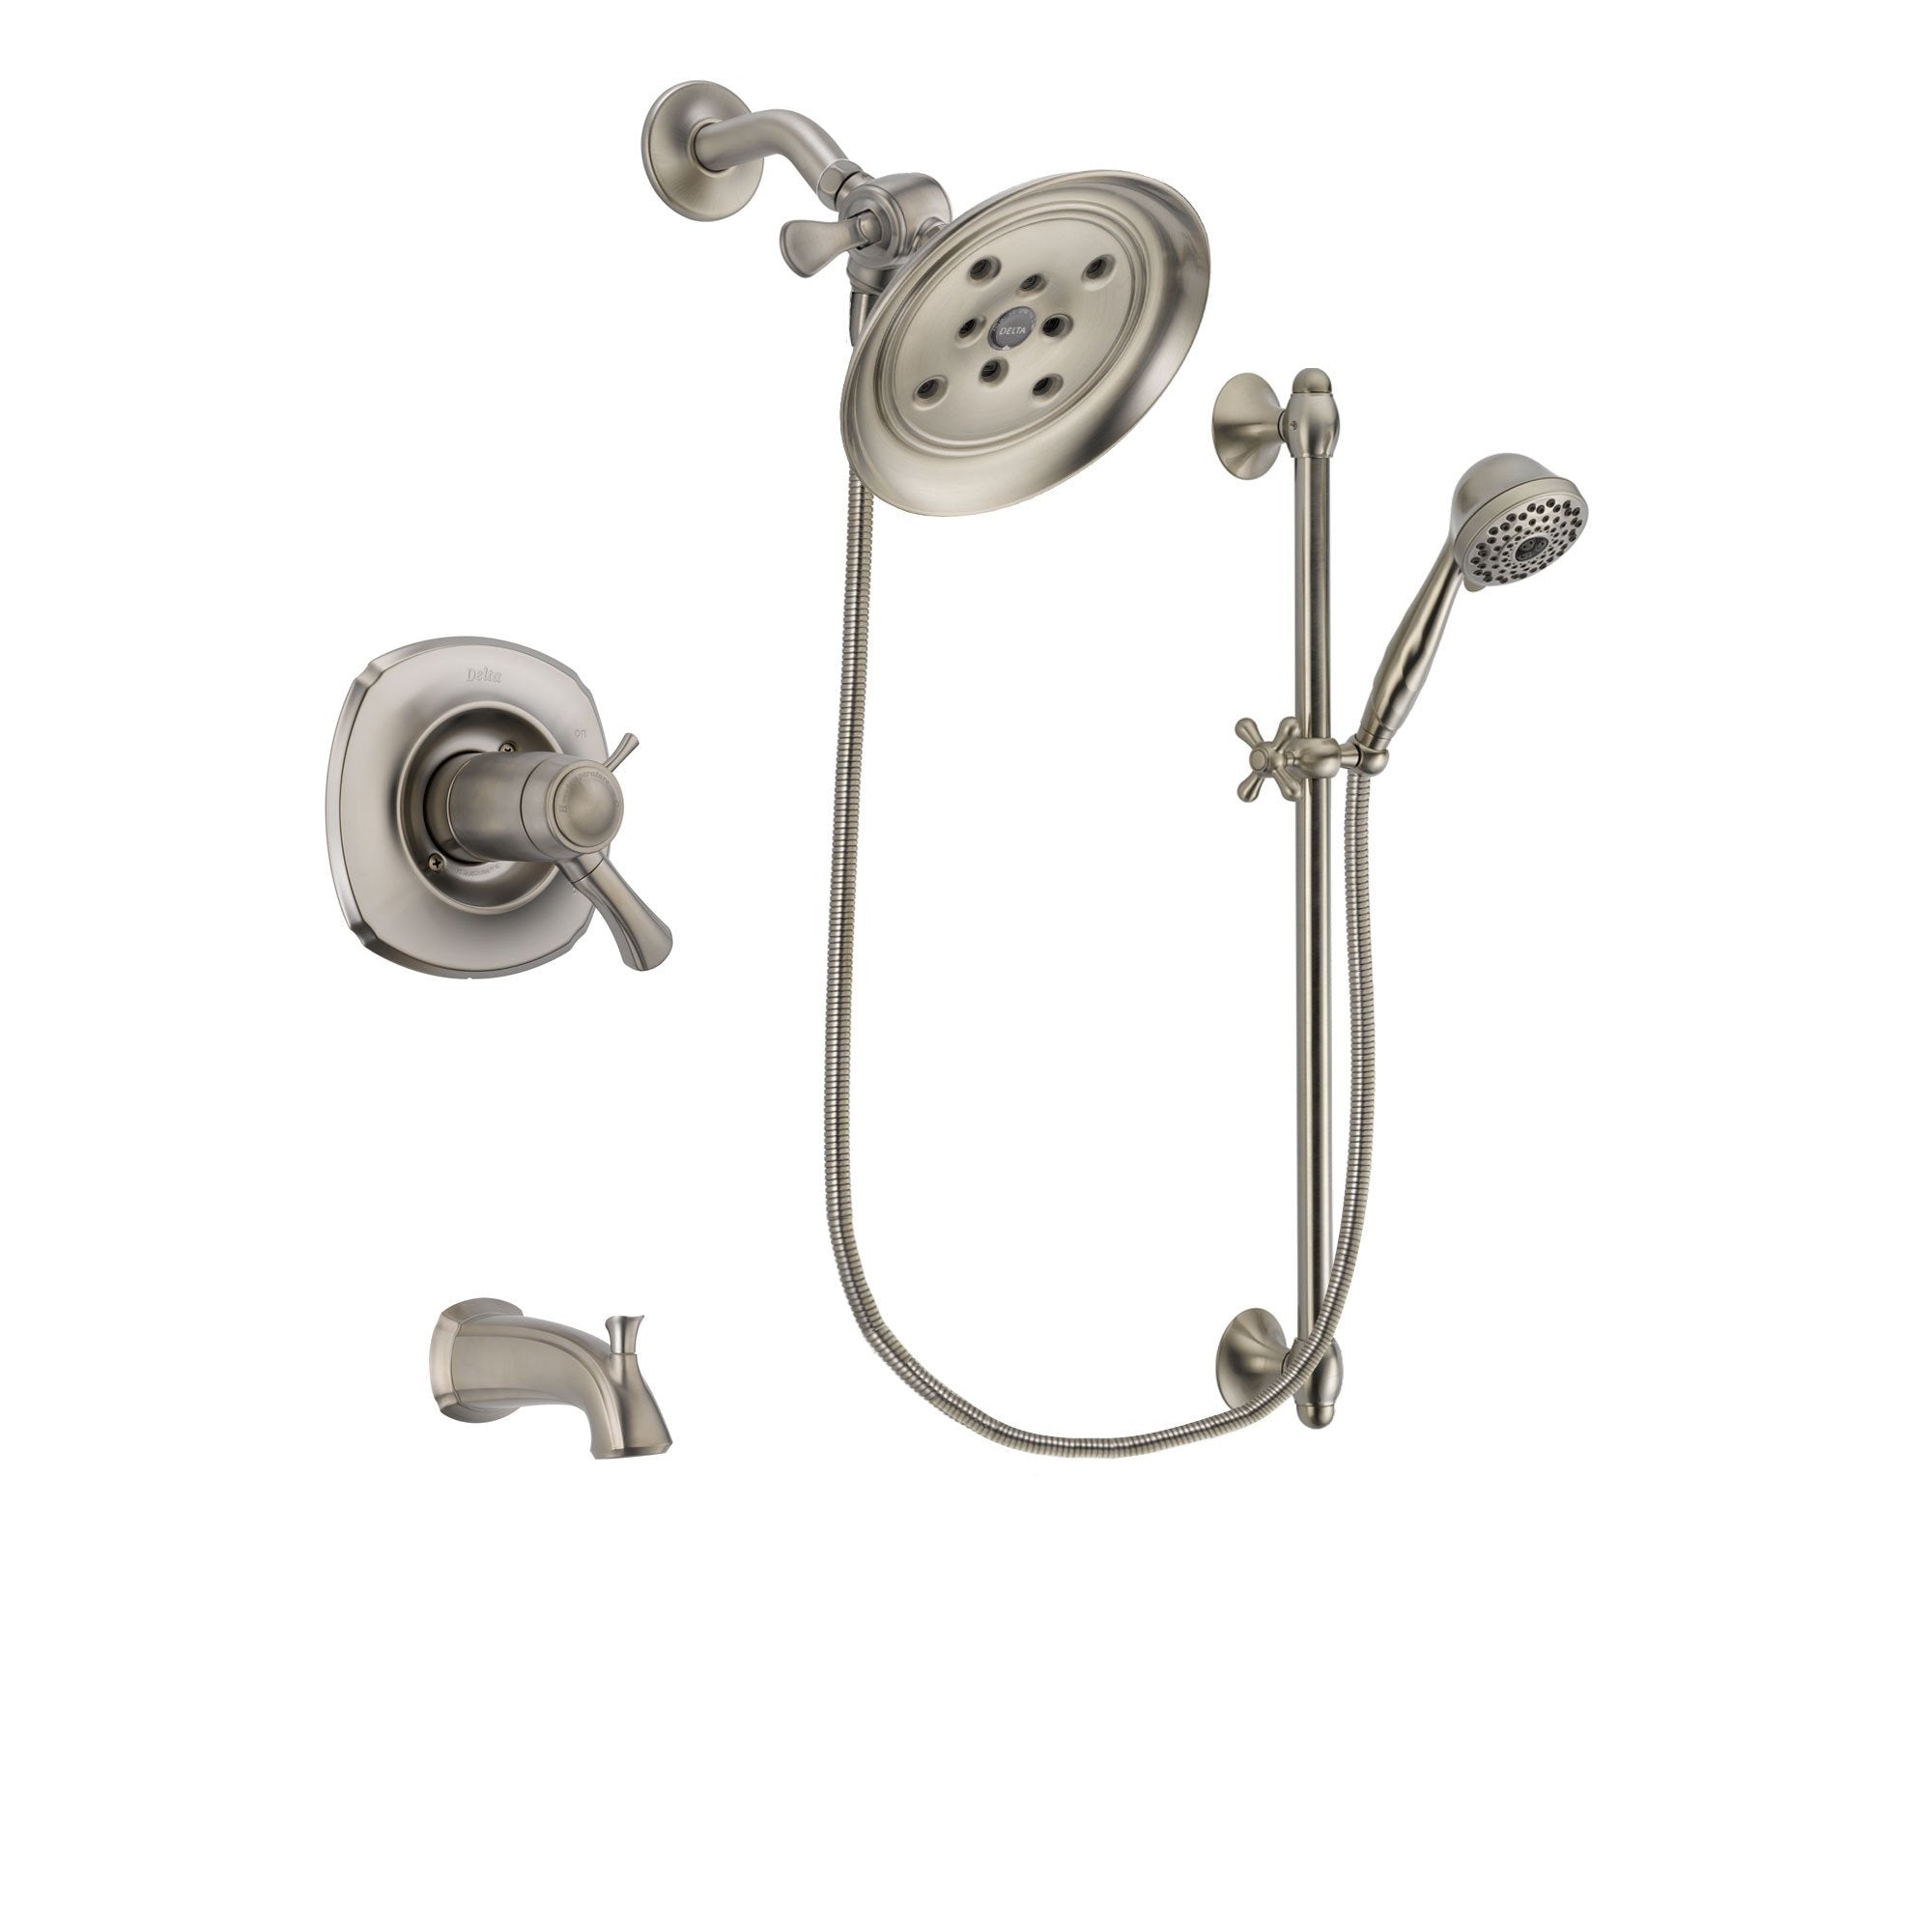 Delta Addison Stainless Steel Finish Thermostatic Tub and Shower Faucet System Package with Large Rain Showerhead and 7-Spray Handheld Shower with Slide Bar Includes Rough-in Valve and Tub Spout DSP1723V